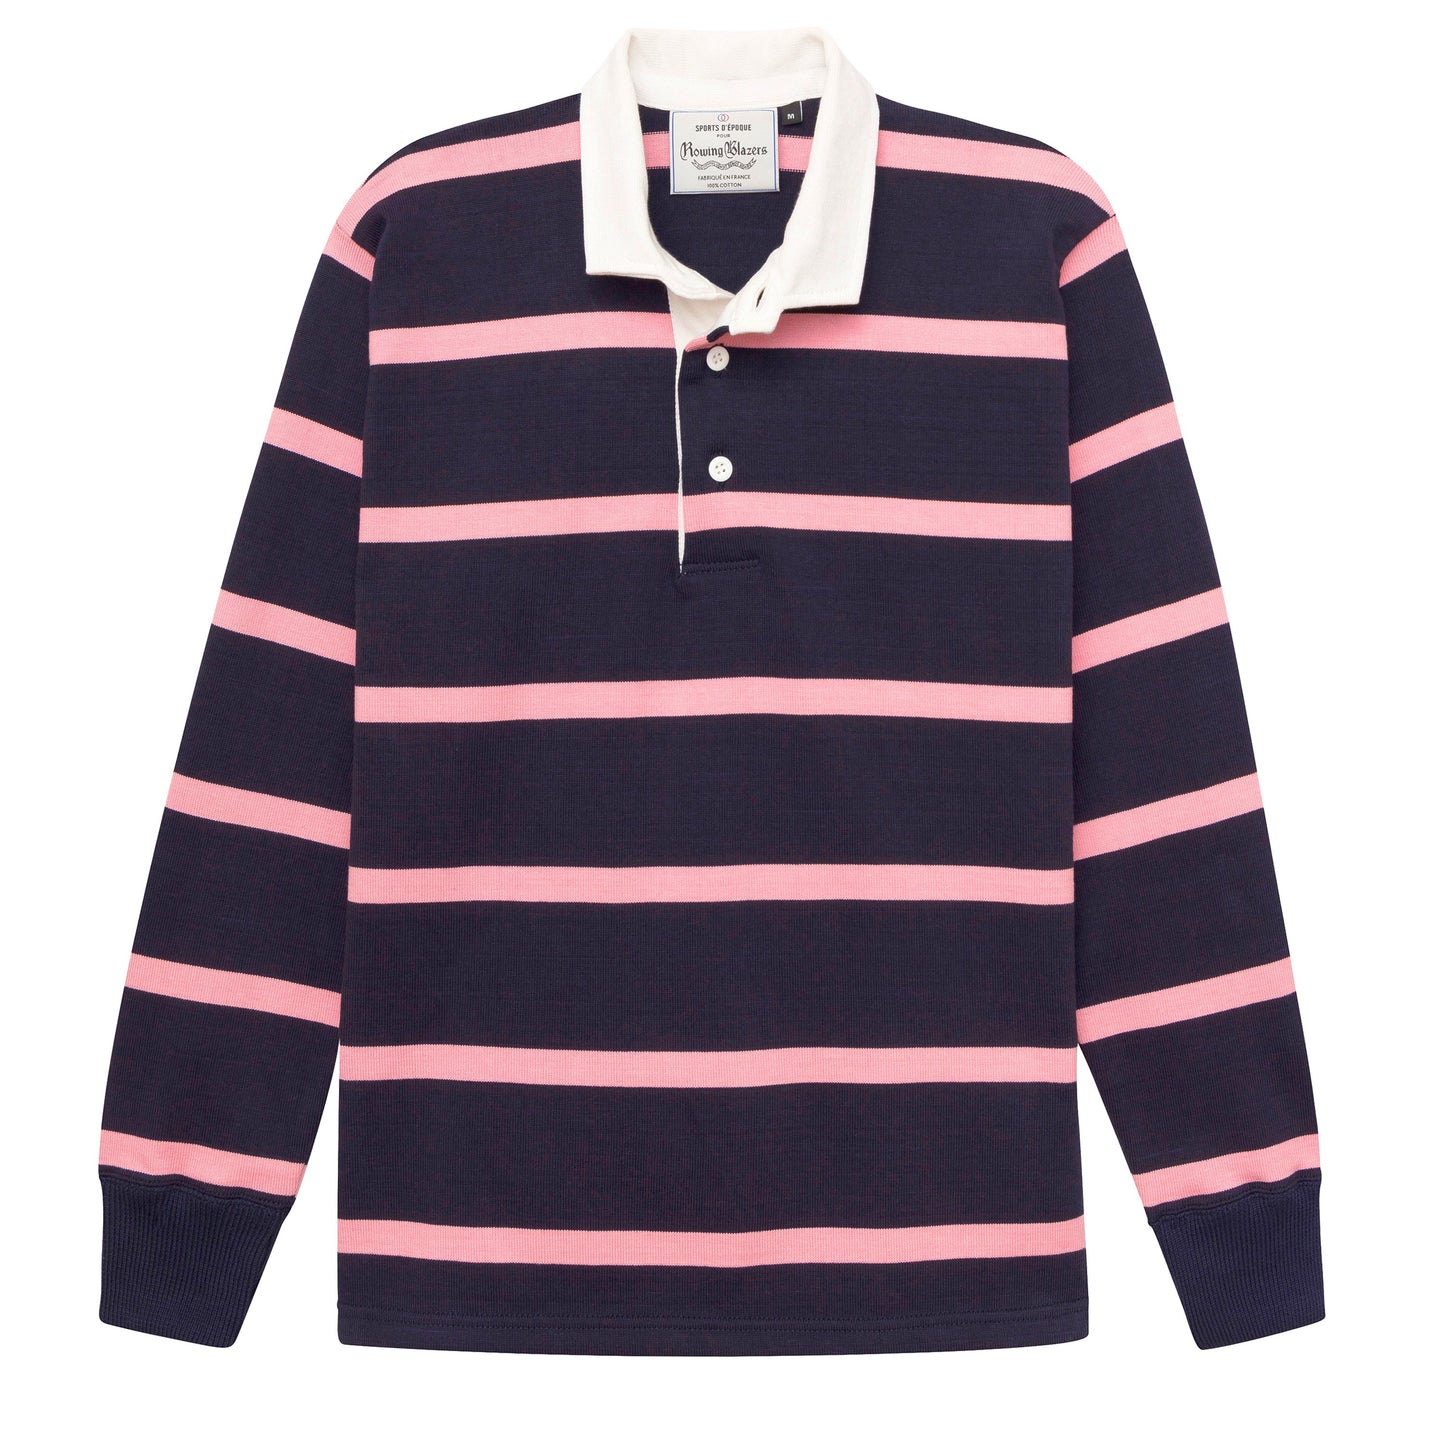 Rugby jersey with navy and pink horizontal stripes. 